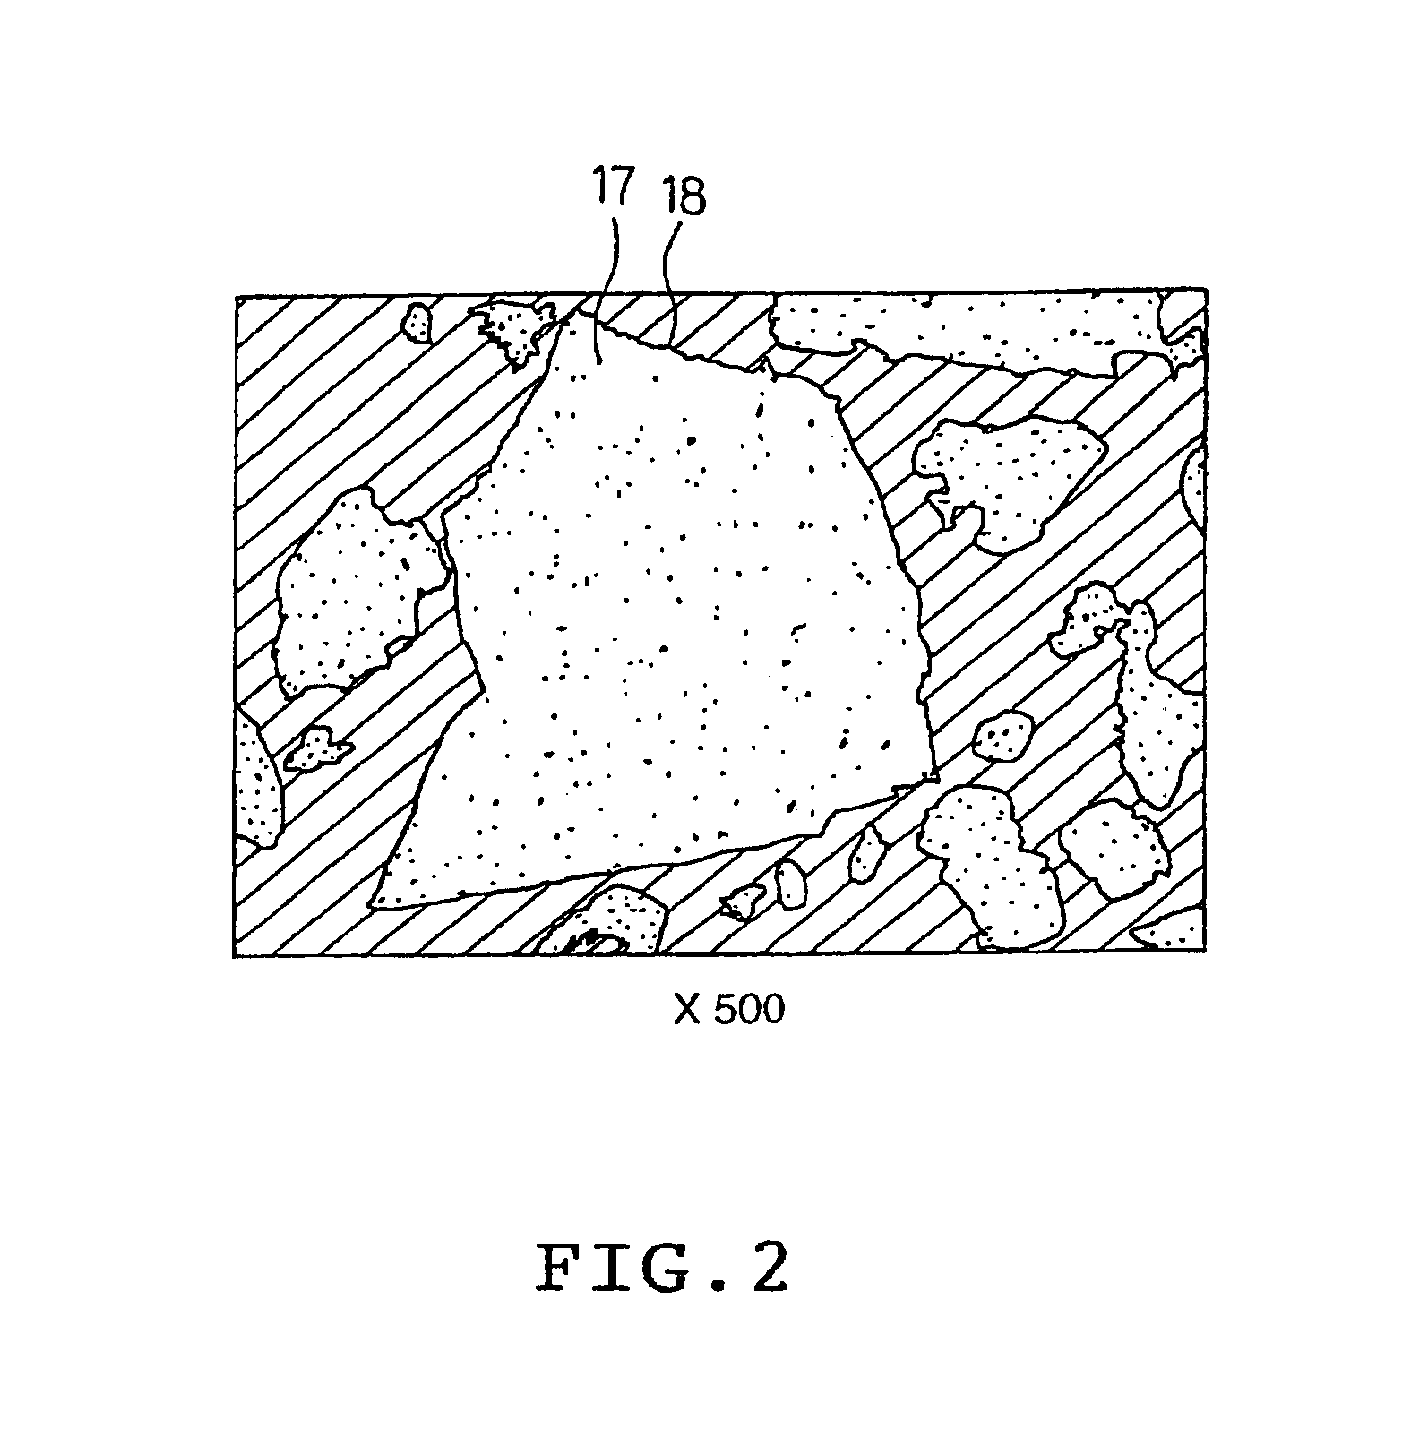 Sliding material made of copper alloy, method of producing same, sliding bearing material, and method of producing same